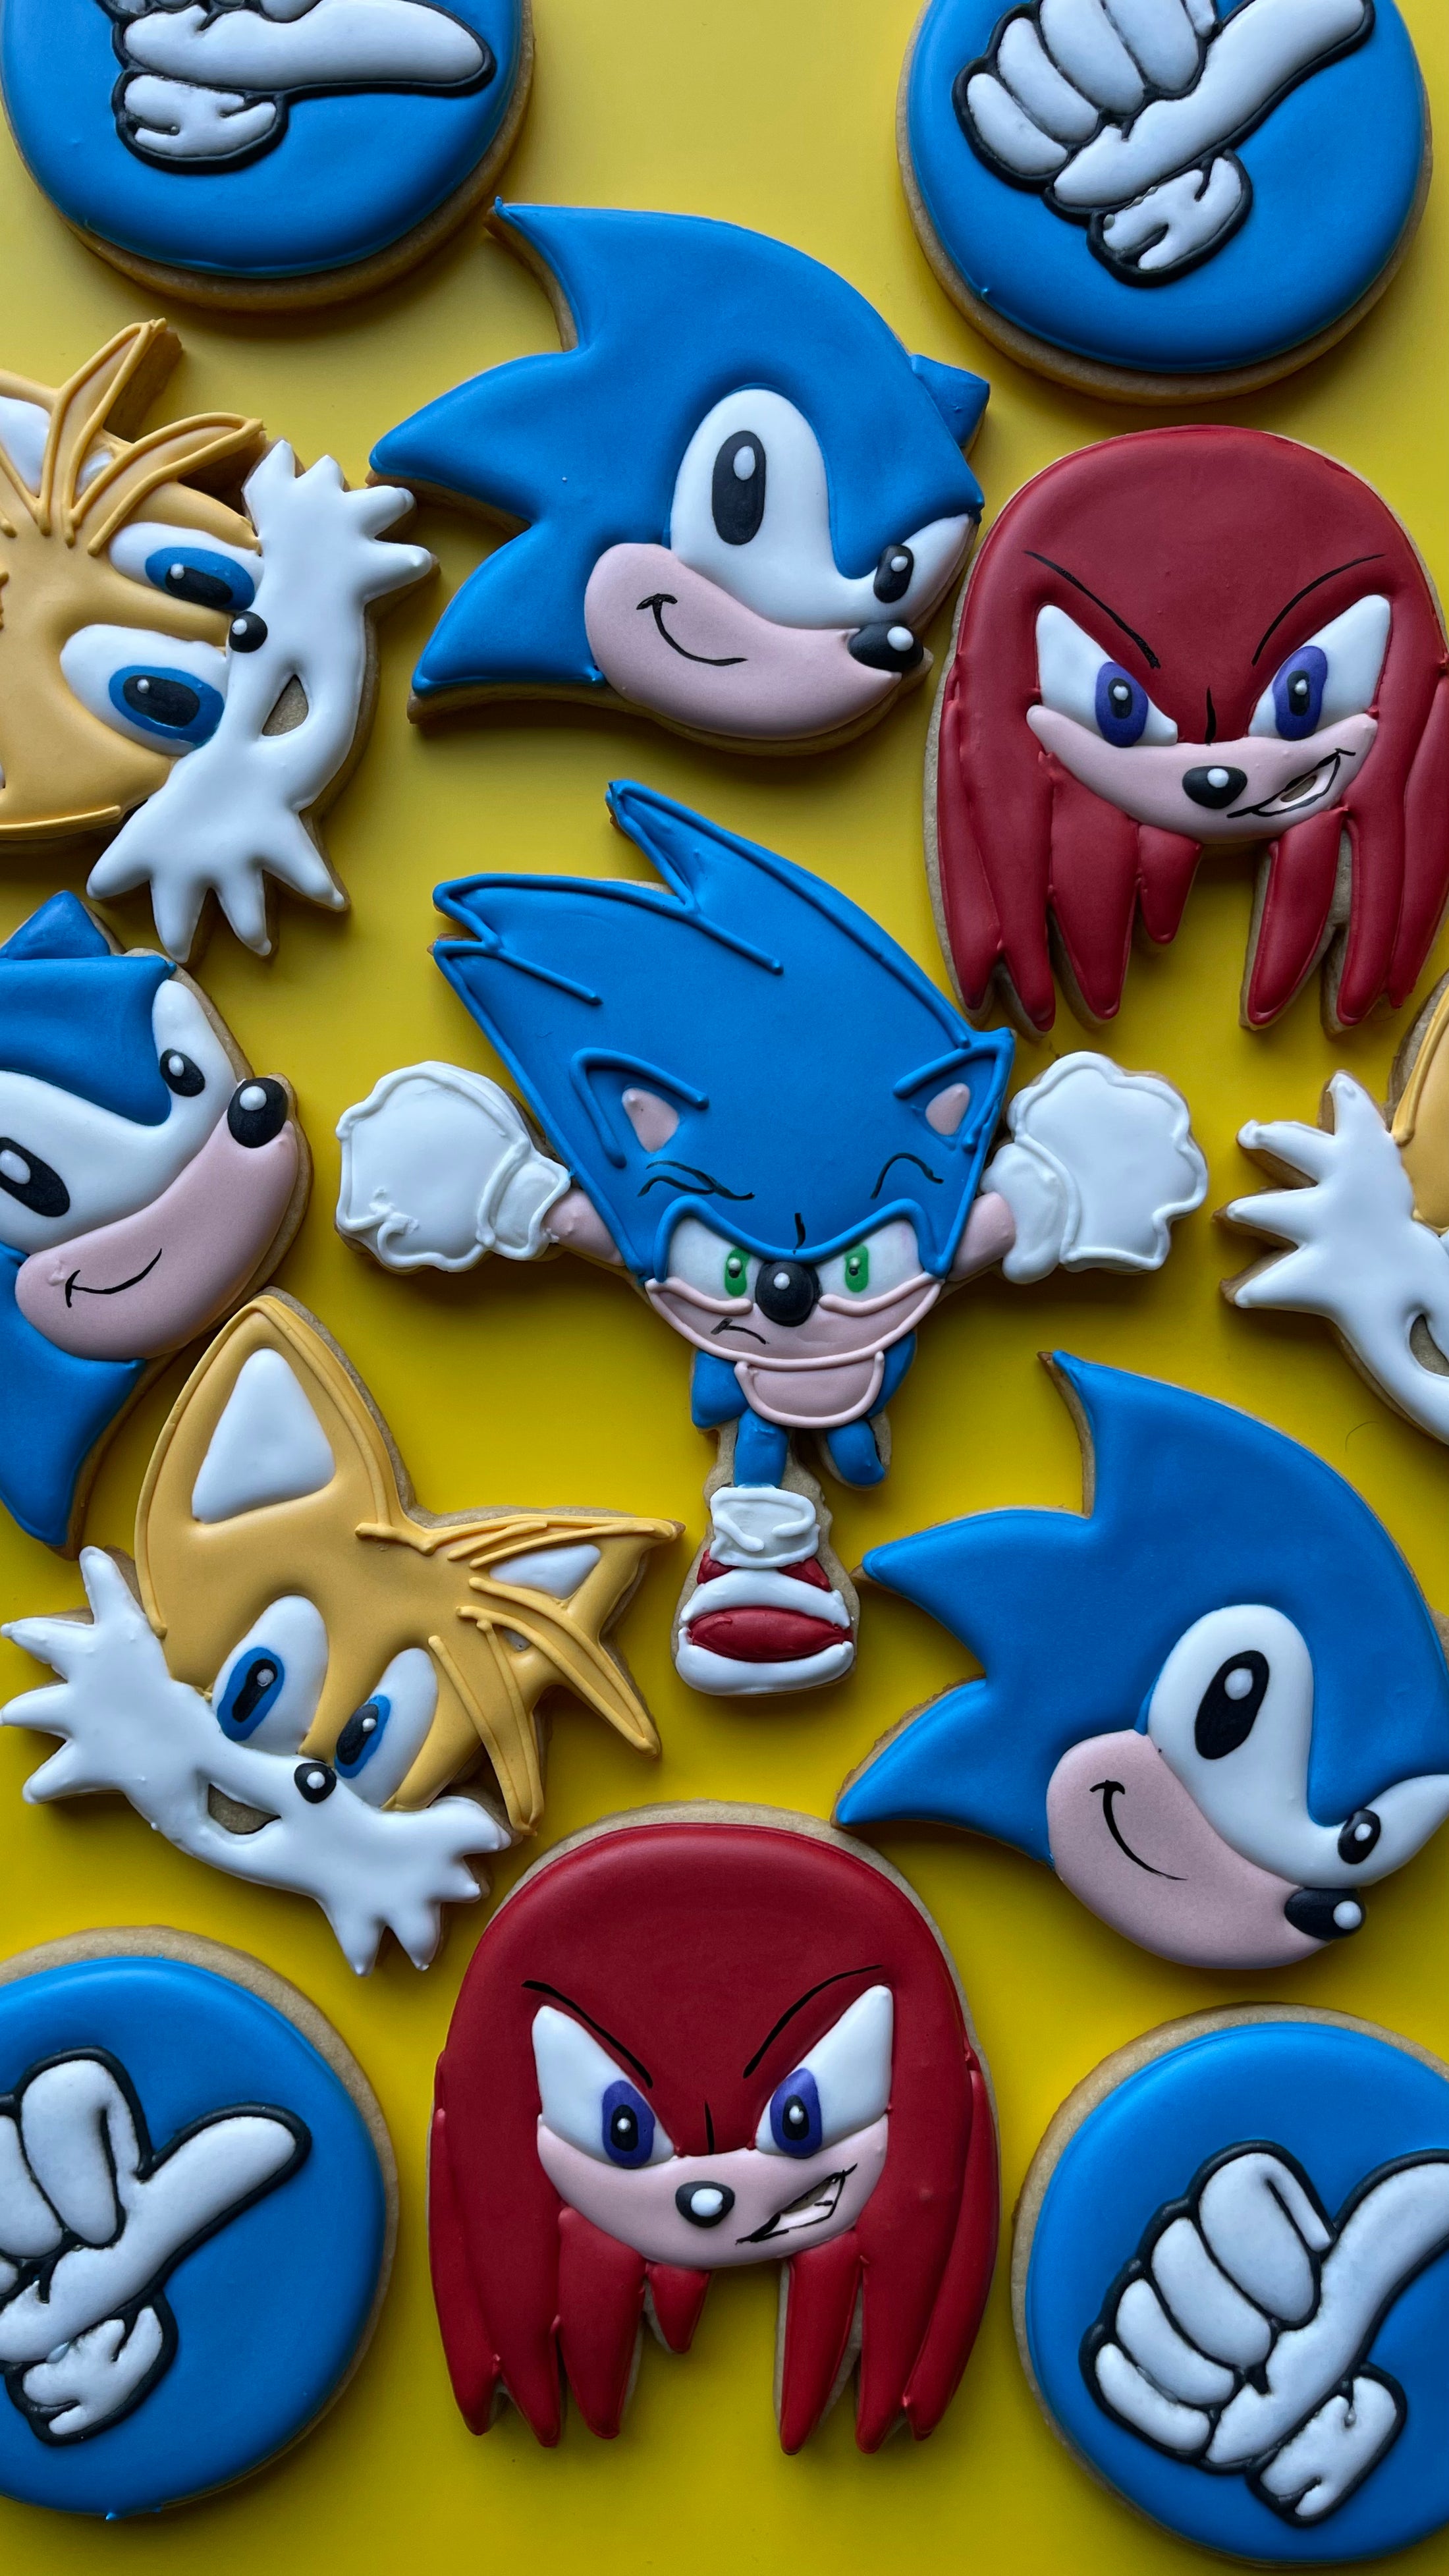 Sonic The Hedgehog face 3.5  inch cookie cutter